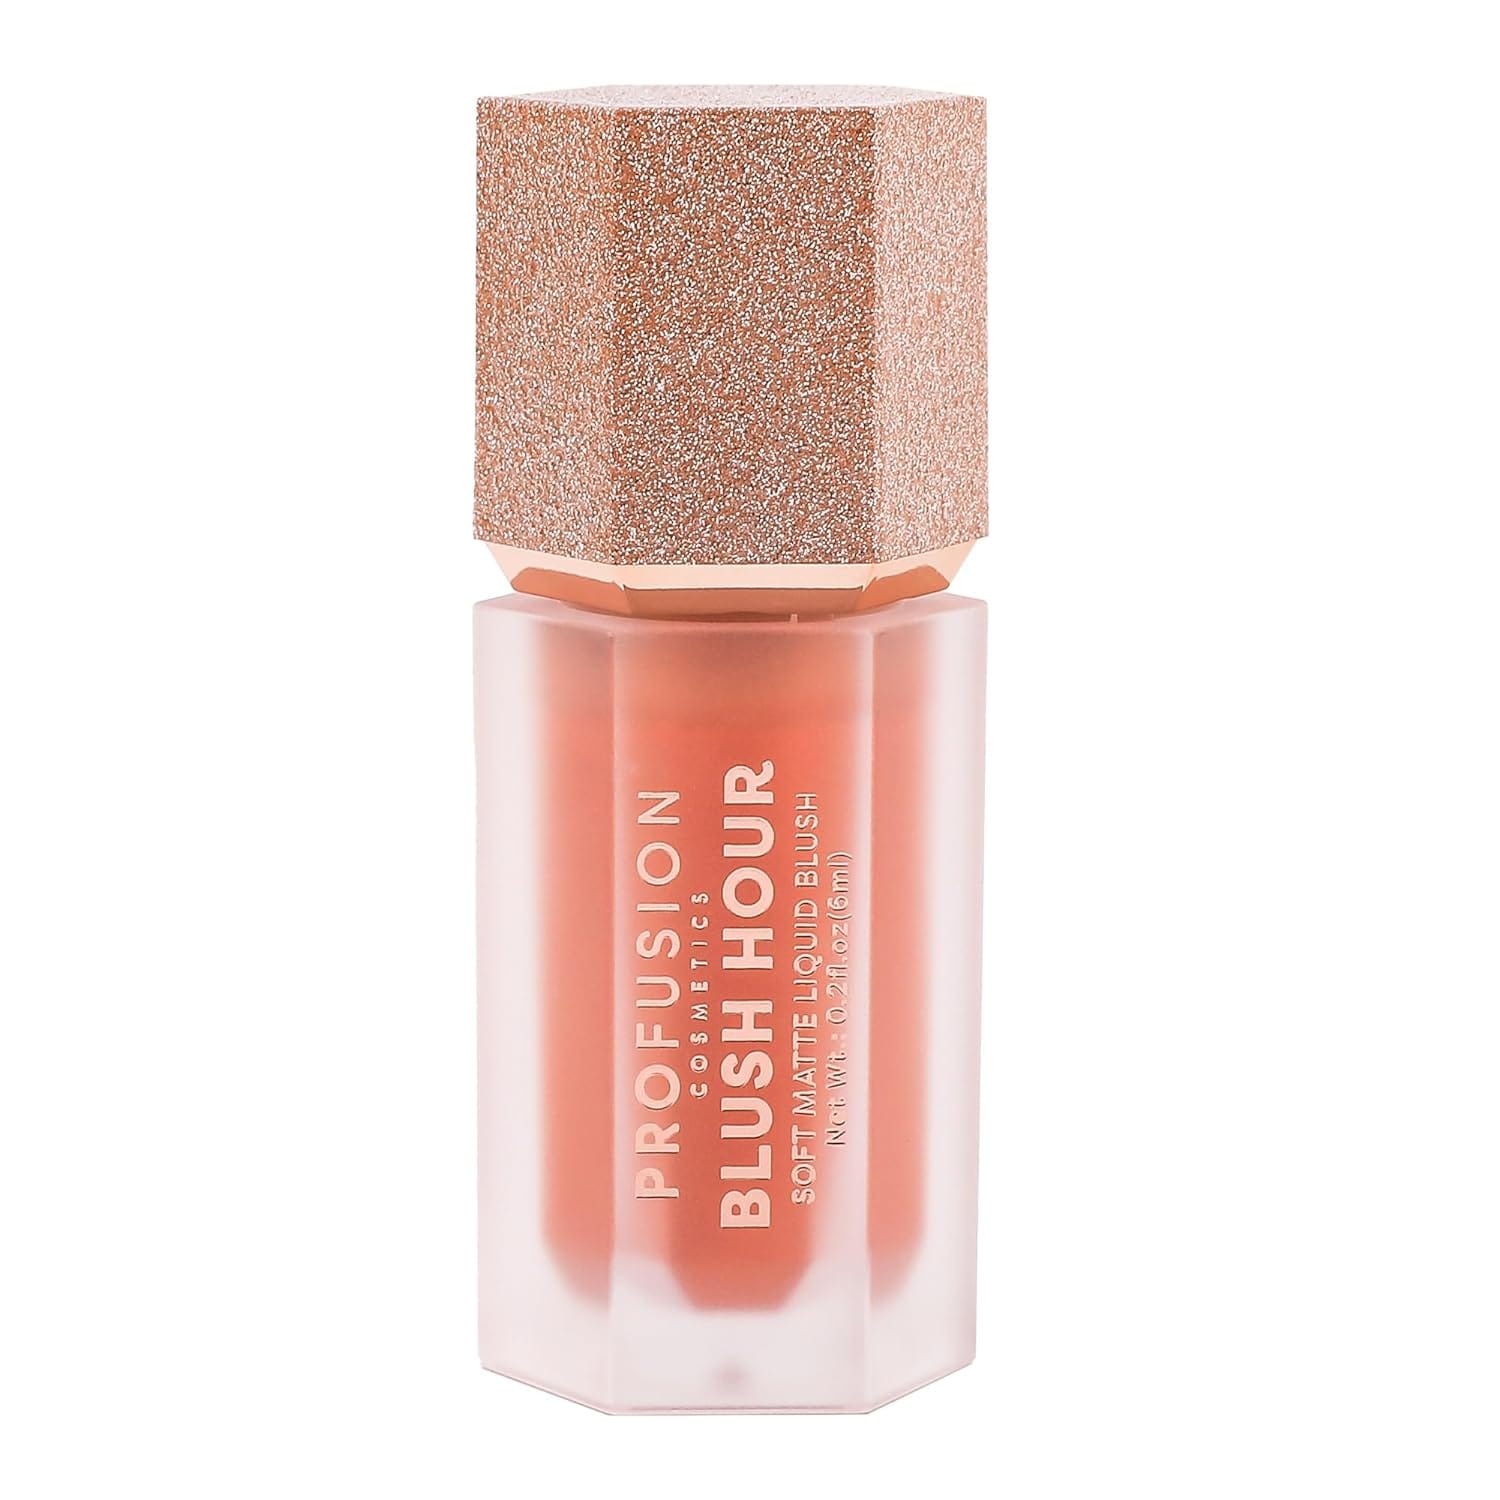 Blushing Beauty: Our Best Profusion Liquid Blush